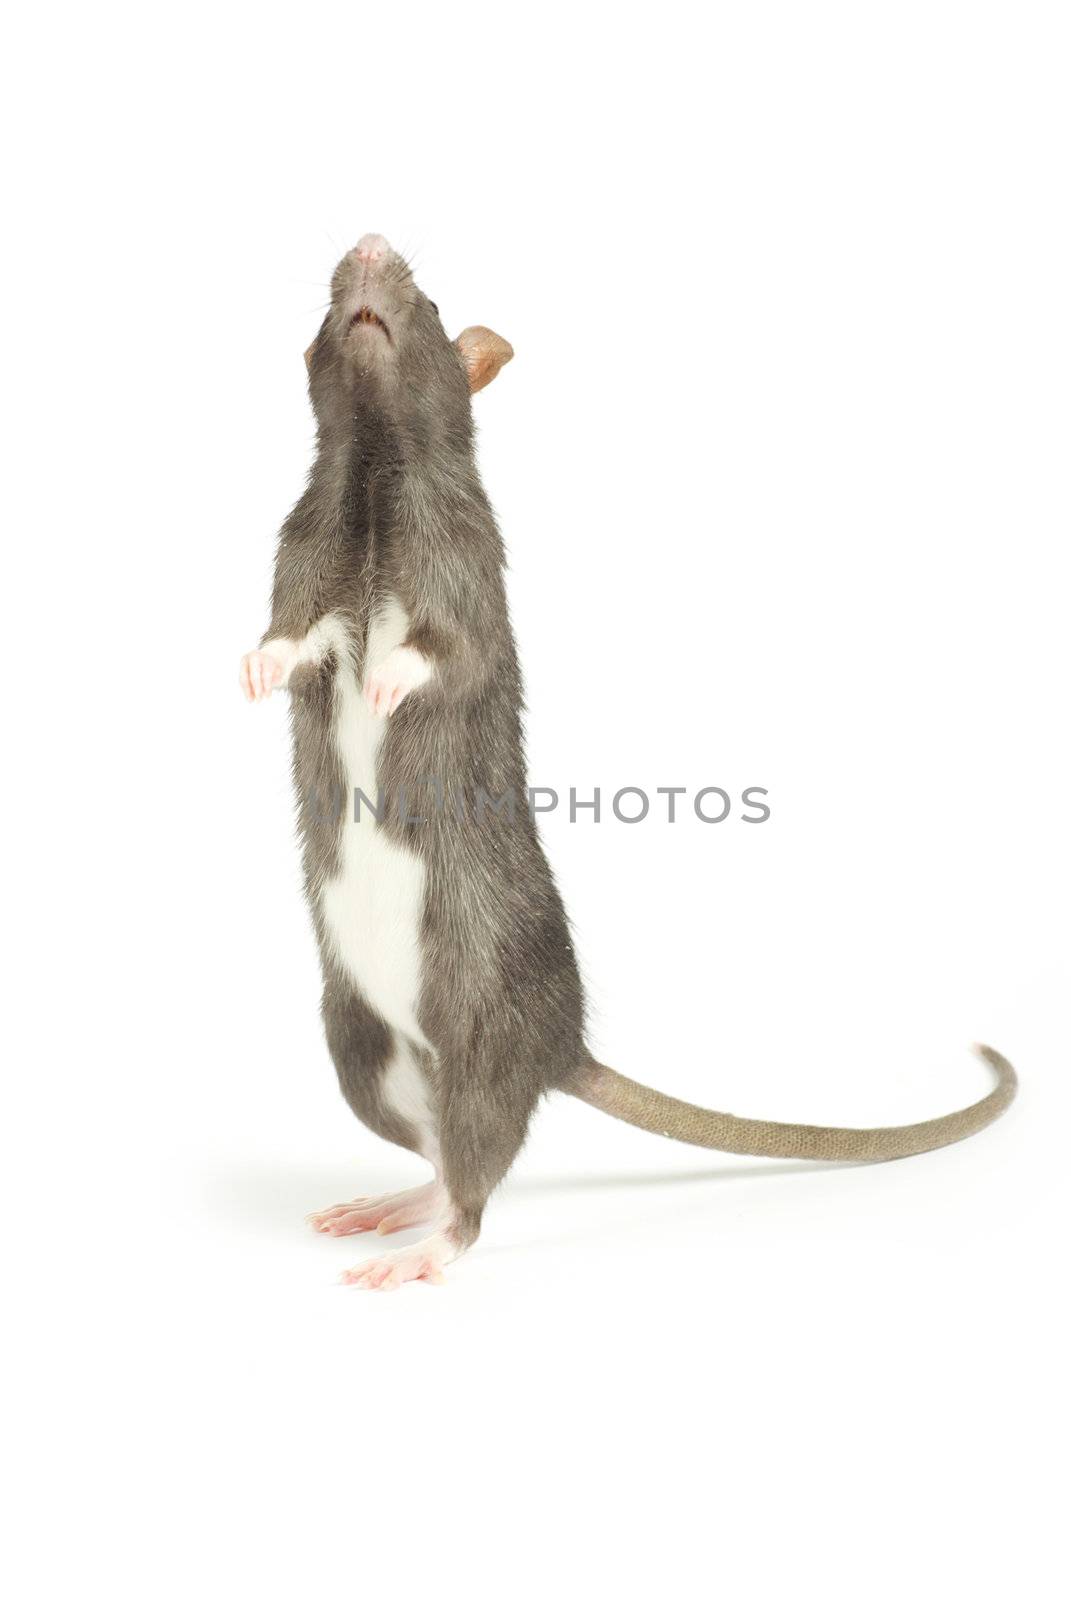 funny rat  isolated on white background